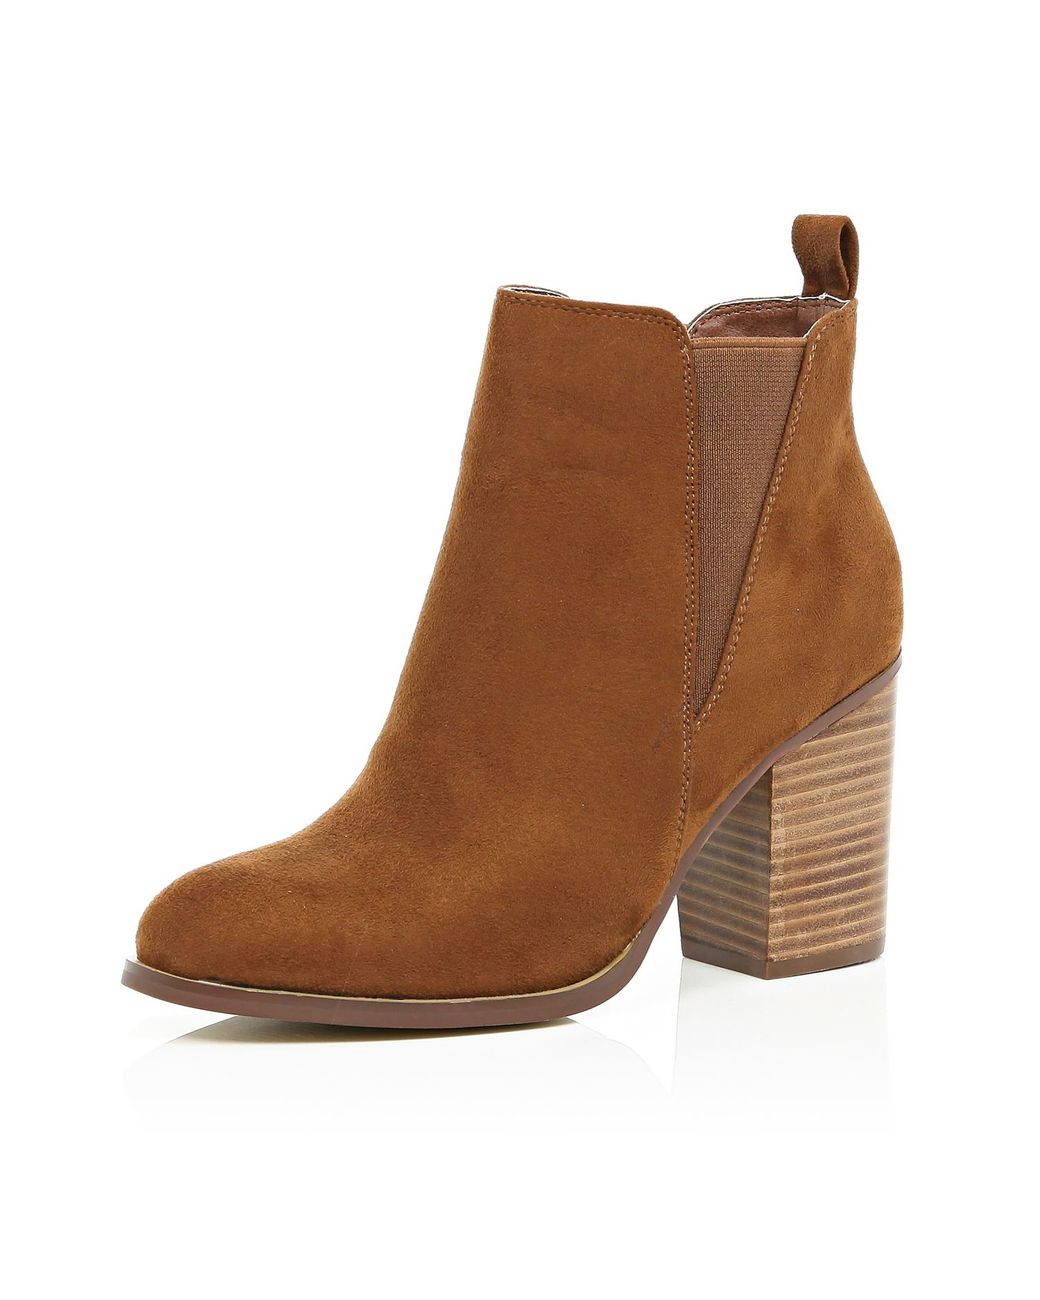 River Island Tan Brown Heeled Chelsea Boots | Lyst UK